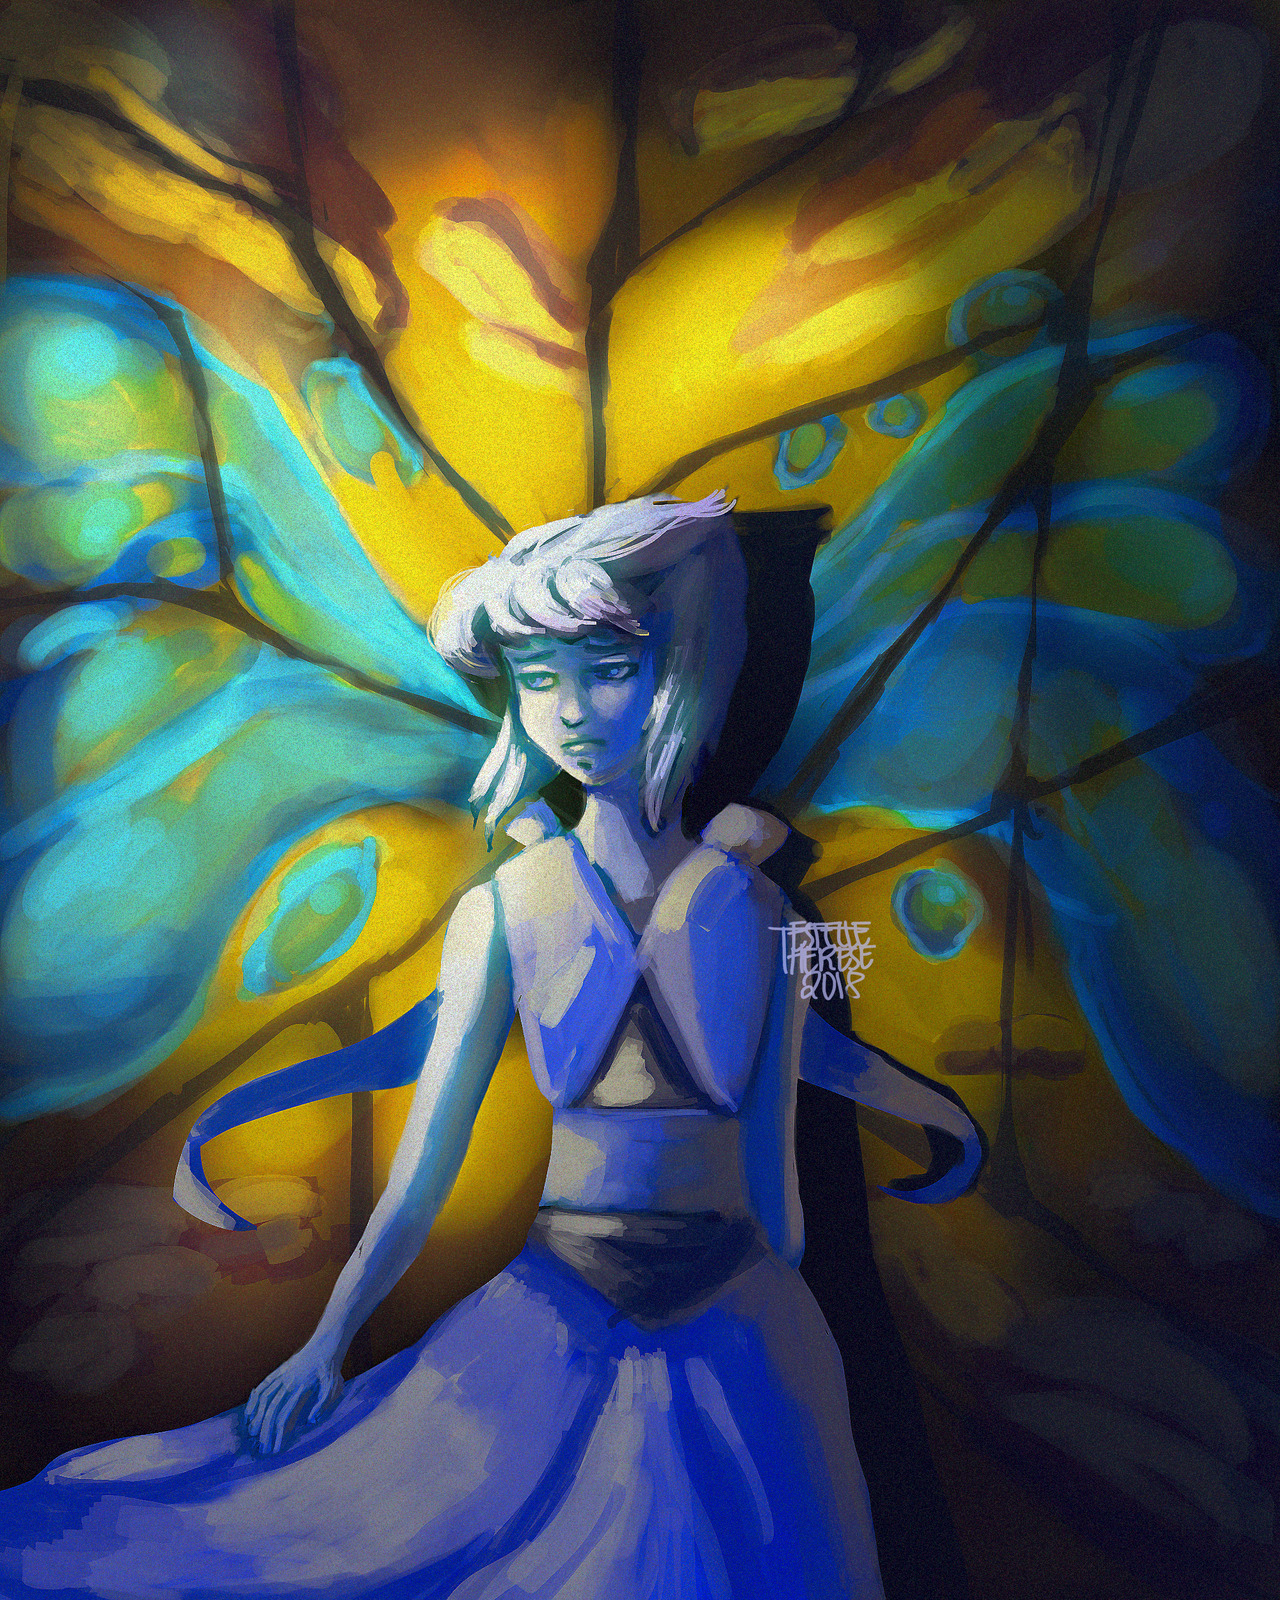 Lapis Lazuli inspired by the recent SU episode Can’t Go Back